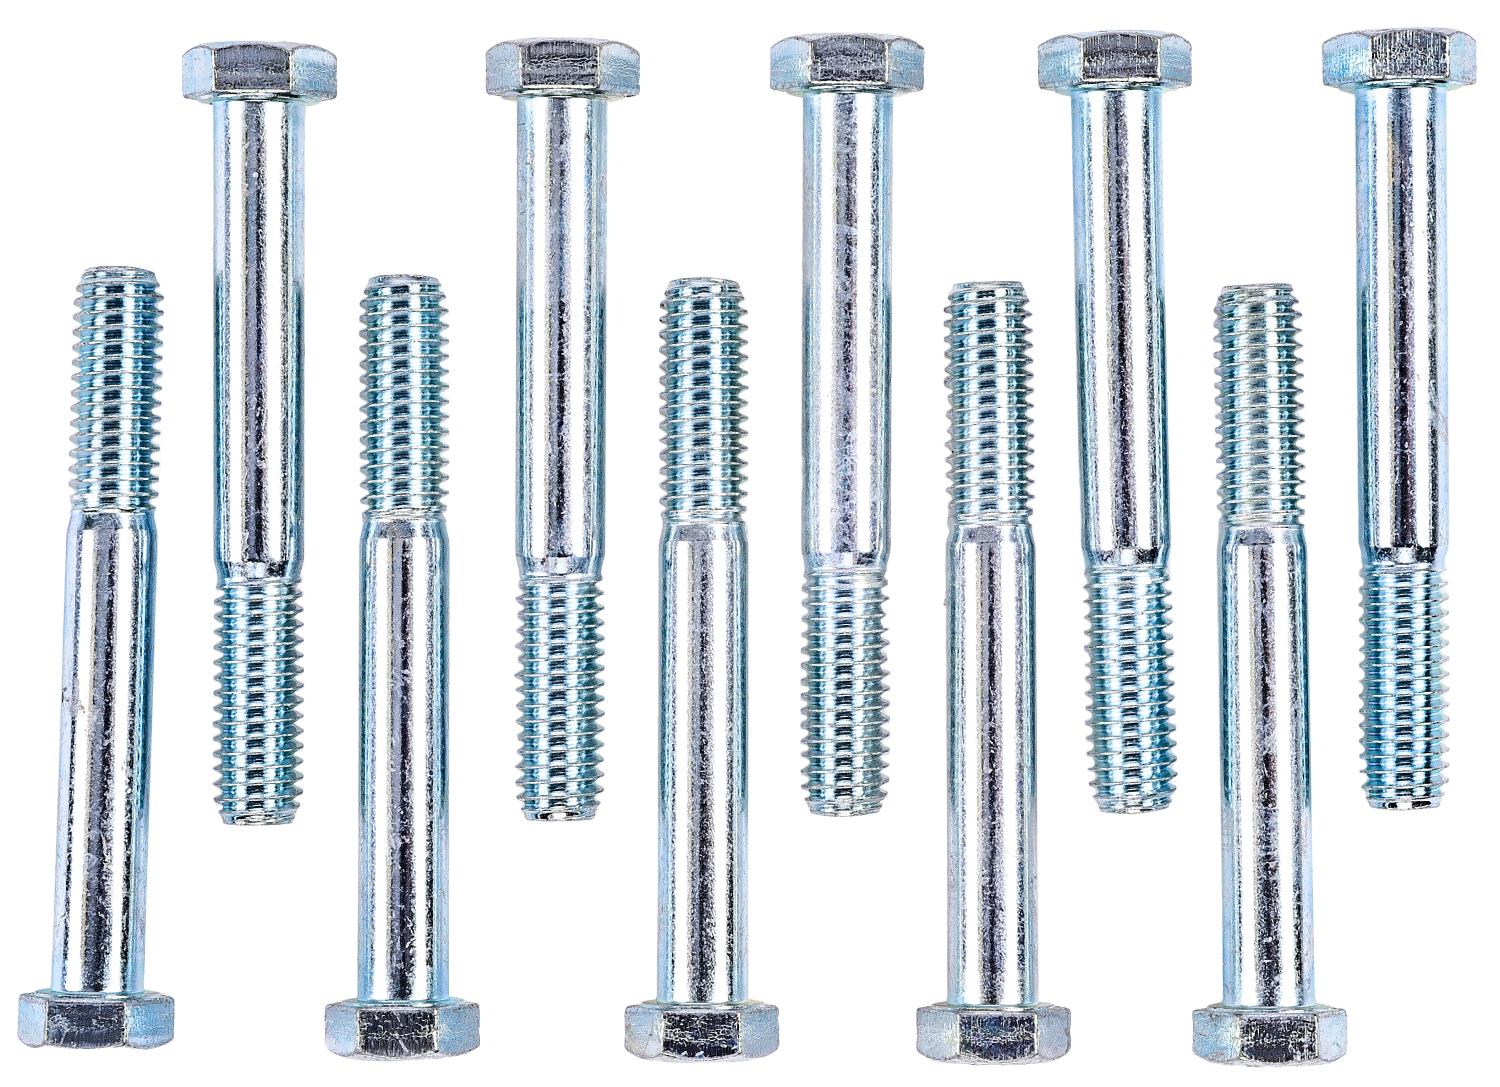 Hex Head Bolts, 3/8 in.-16 x 3 in. UHL, Carbon Steel, Grade 5 [Set of 10]